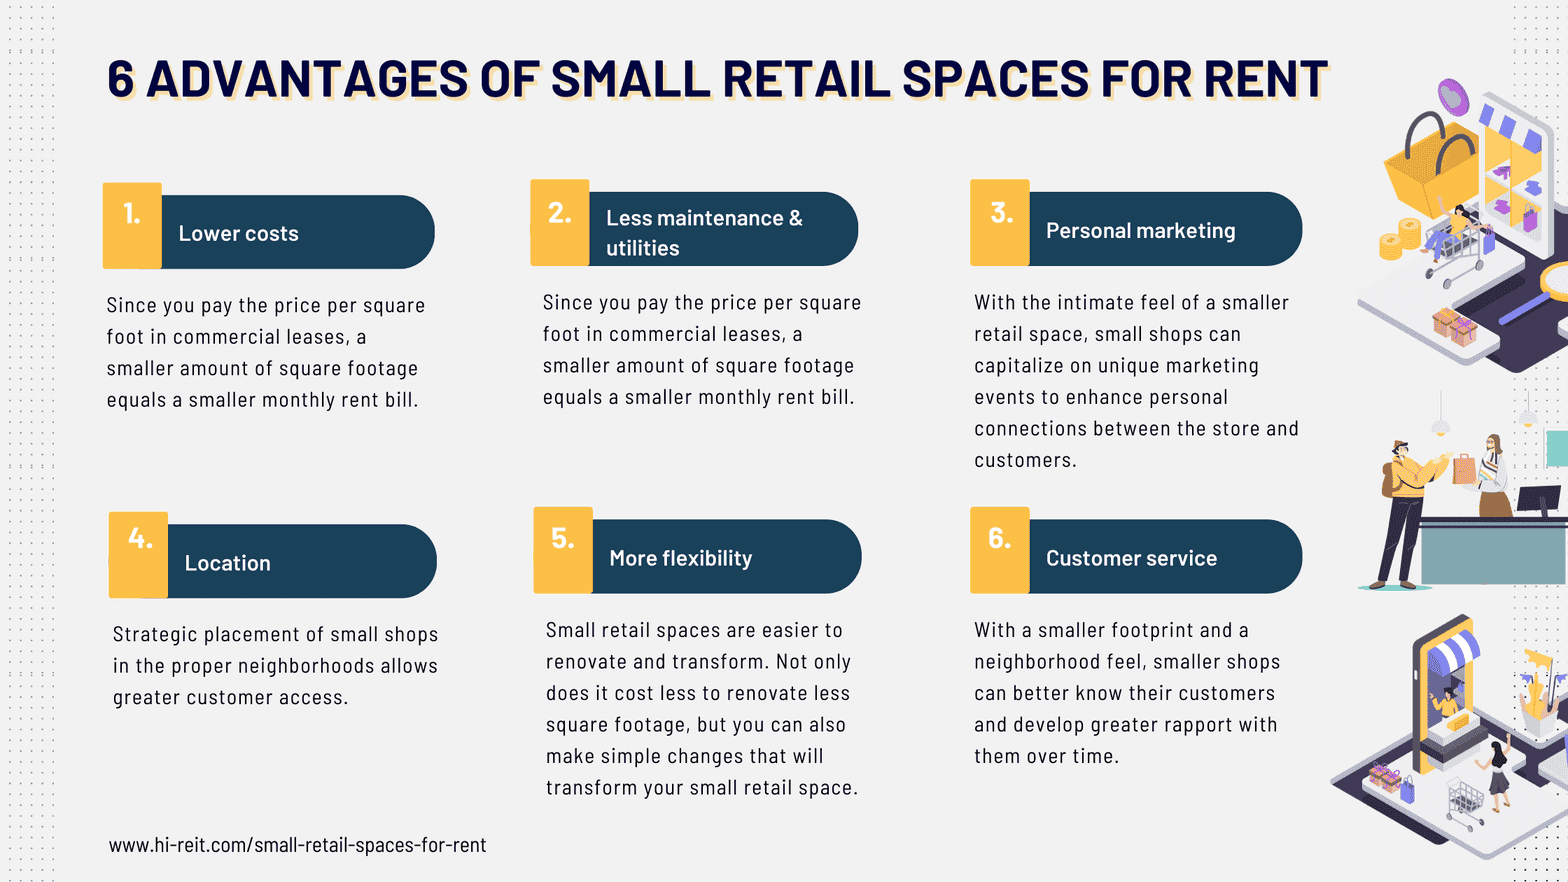 6 Advantages of small retail spaces for rent